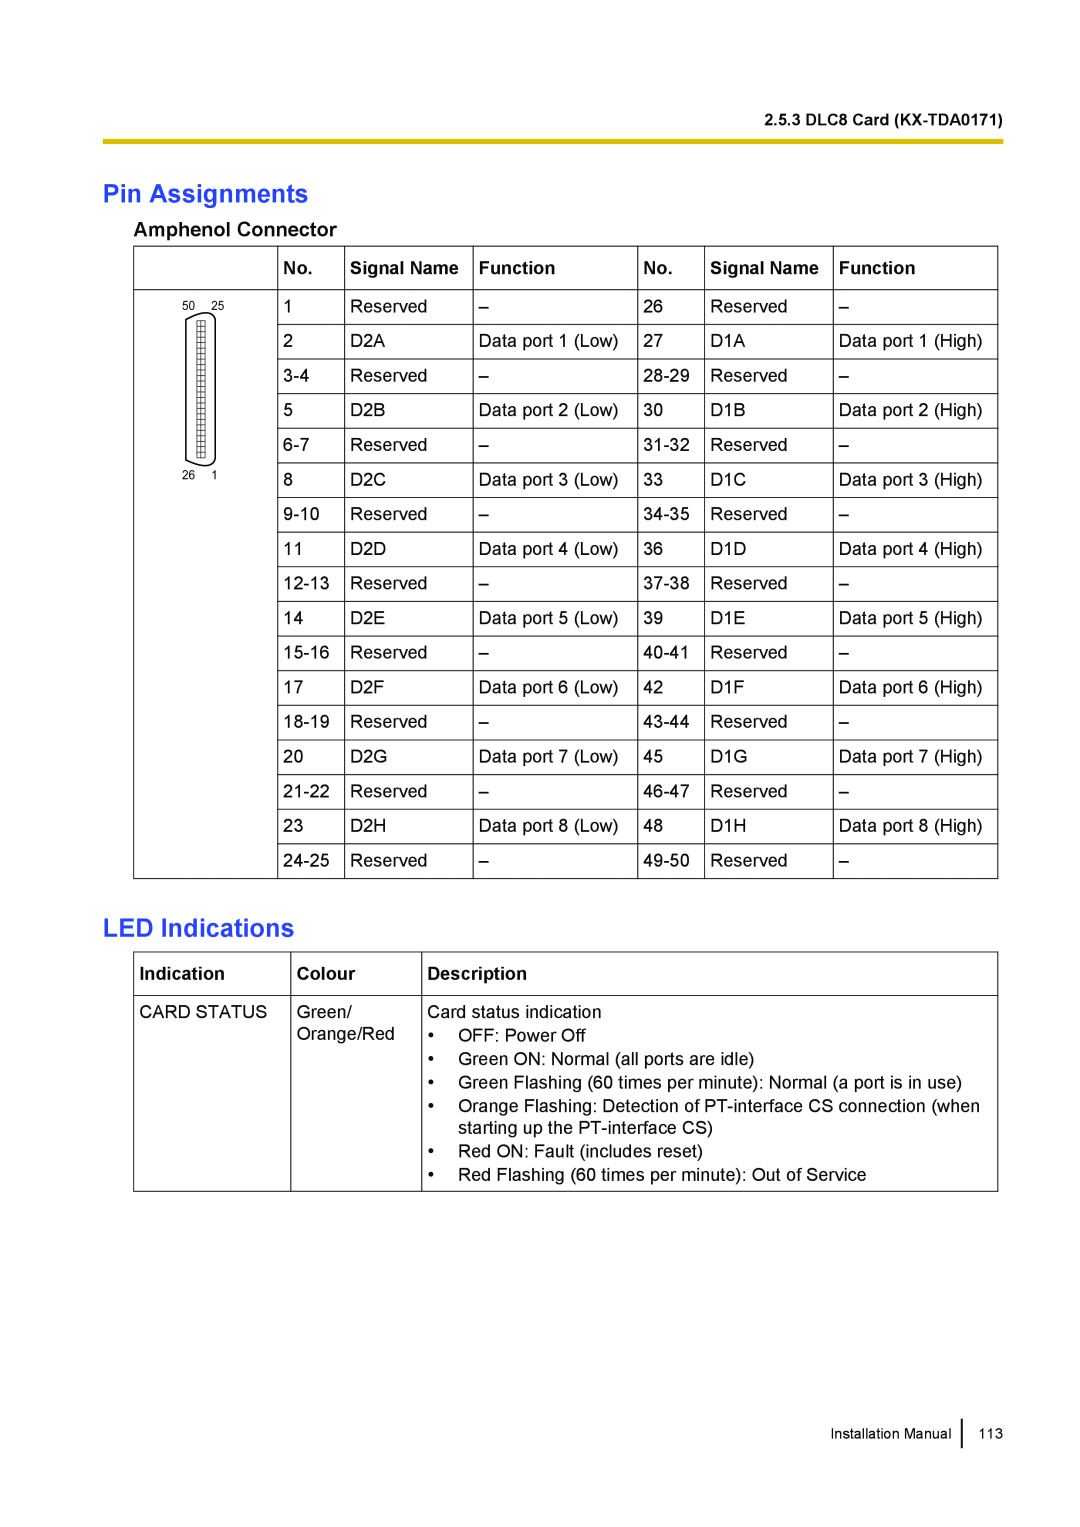 Panasonic KX-TDA100 Pin Assignments, LED Indications, Amphenol Connector, Signal Name, Function, Colour, Description 